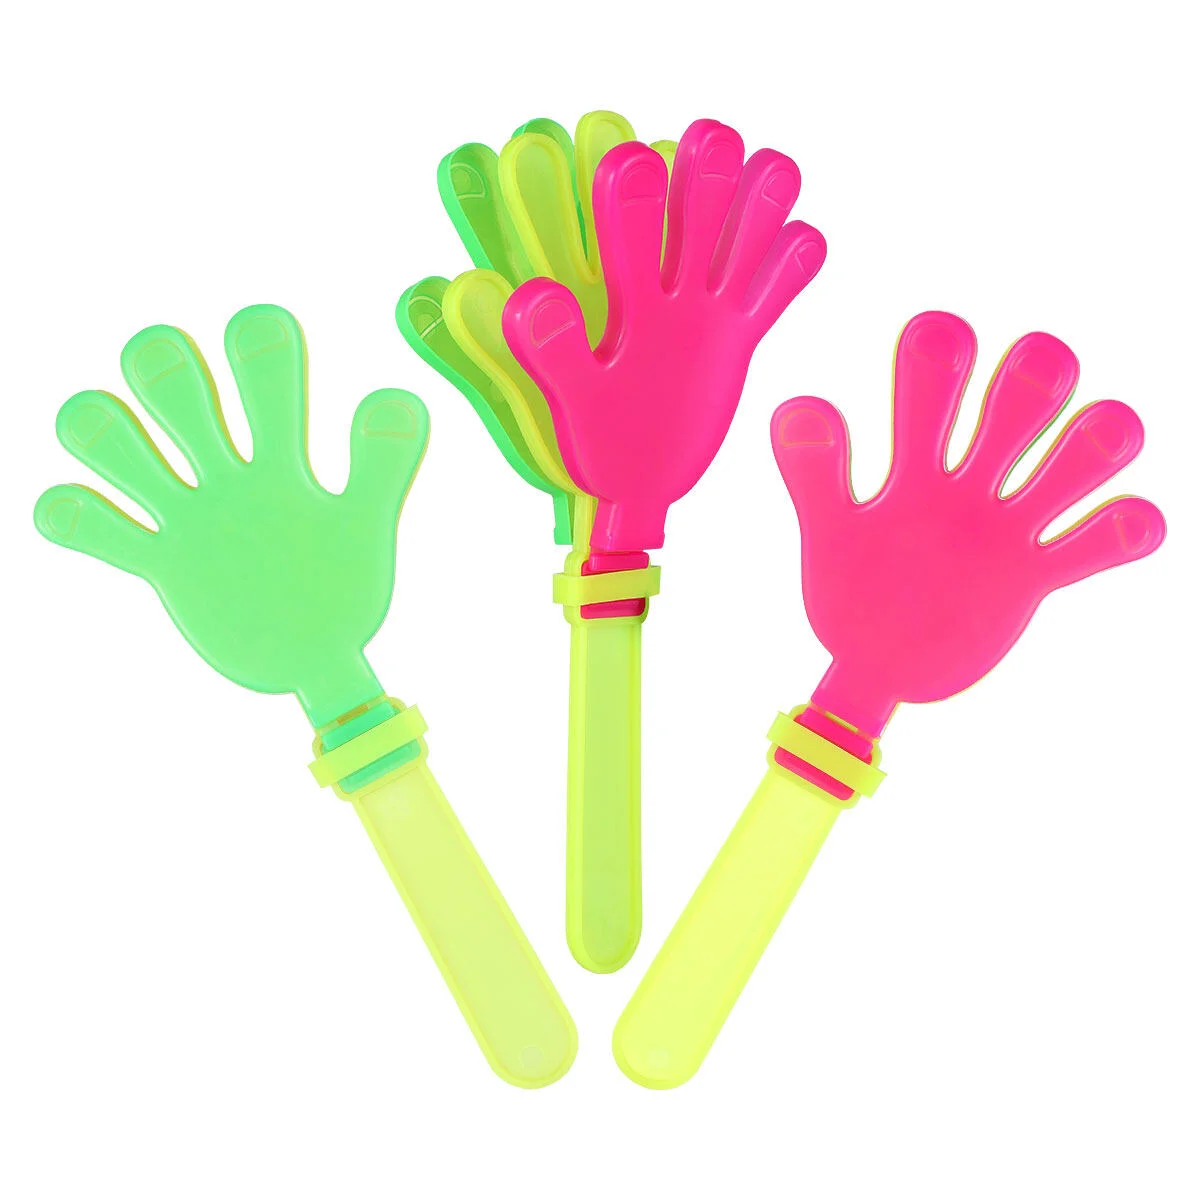 

Hand Clapper 20pcs, 73 x 33 inch Hand Clapper Noisemakers for Giving, Game Accessories,, Party Favor, Prizes and Supplies-